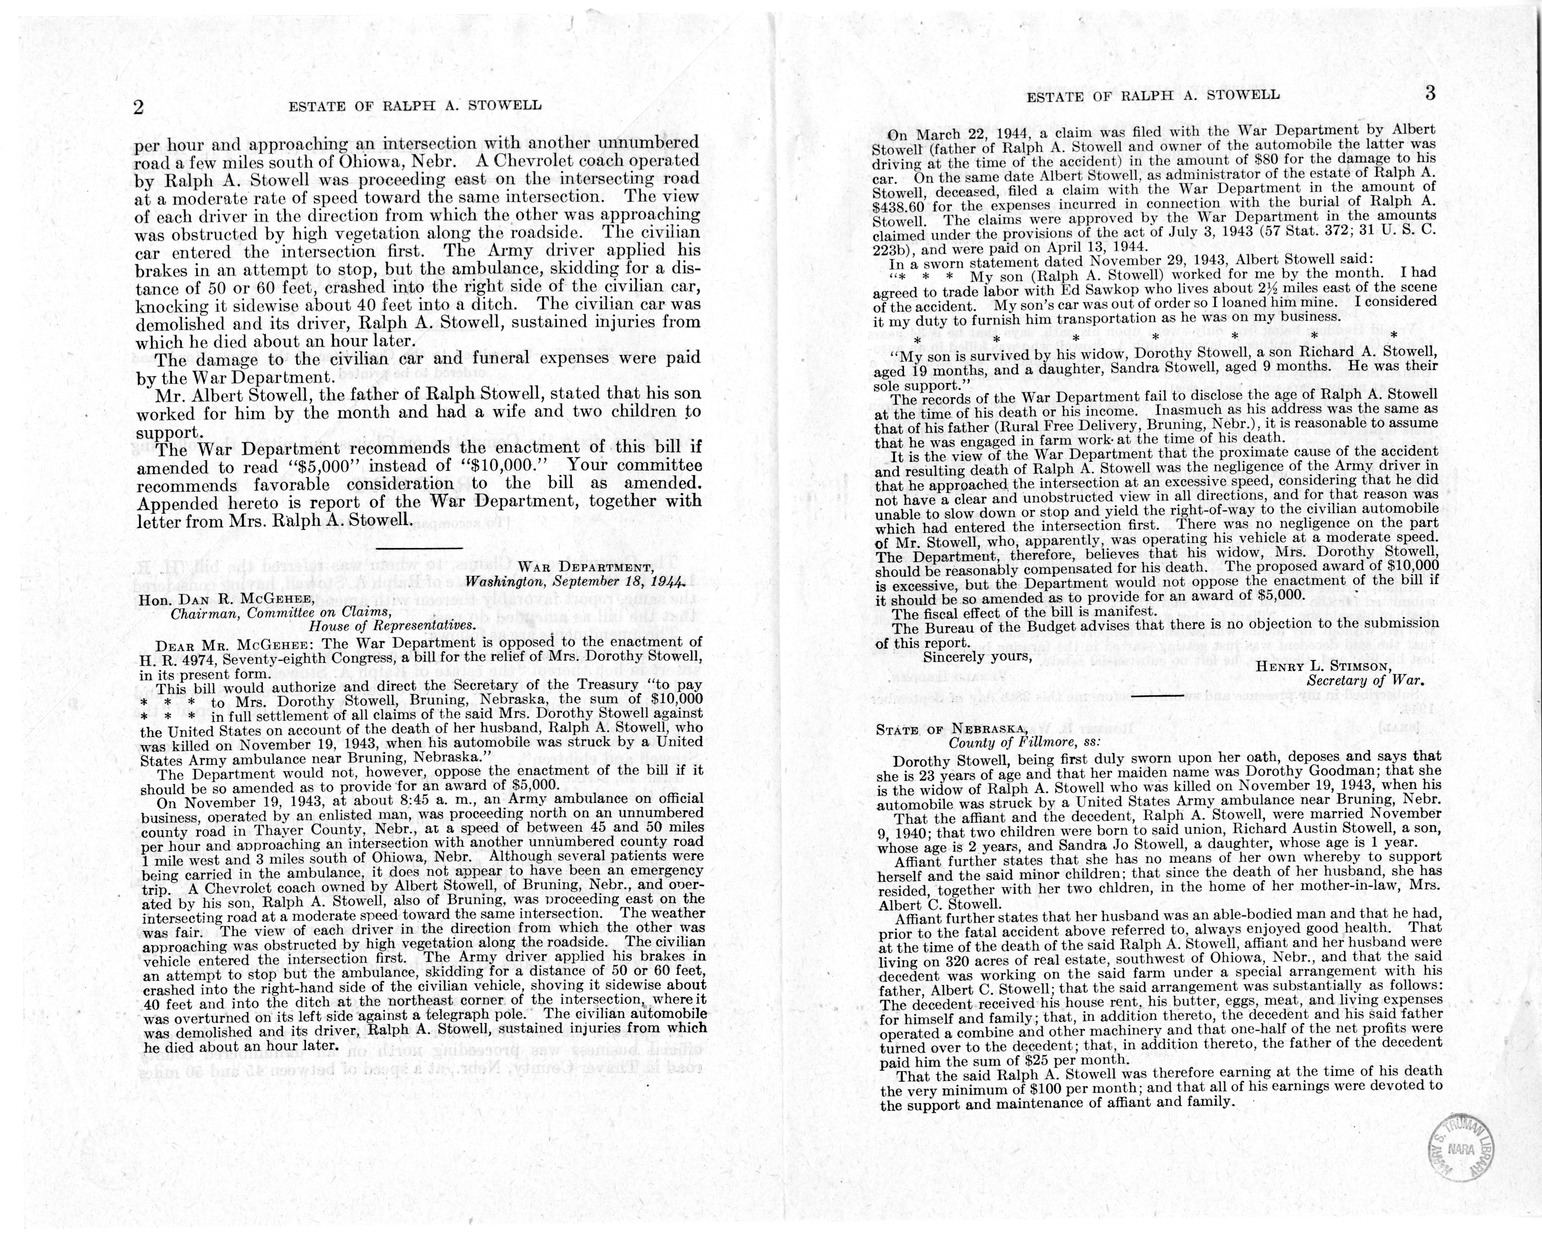 Memorandum from Frederick J. Bailey to M. C. Latta, H.R. 1669, For the Relief of the Estate of Ralph A. Stowell, with Attachments